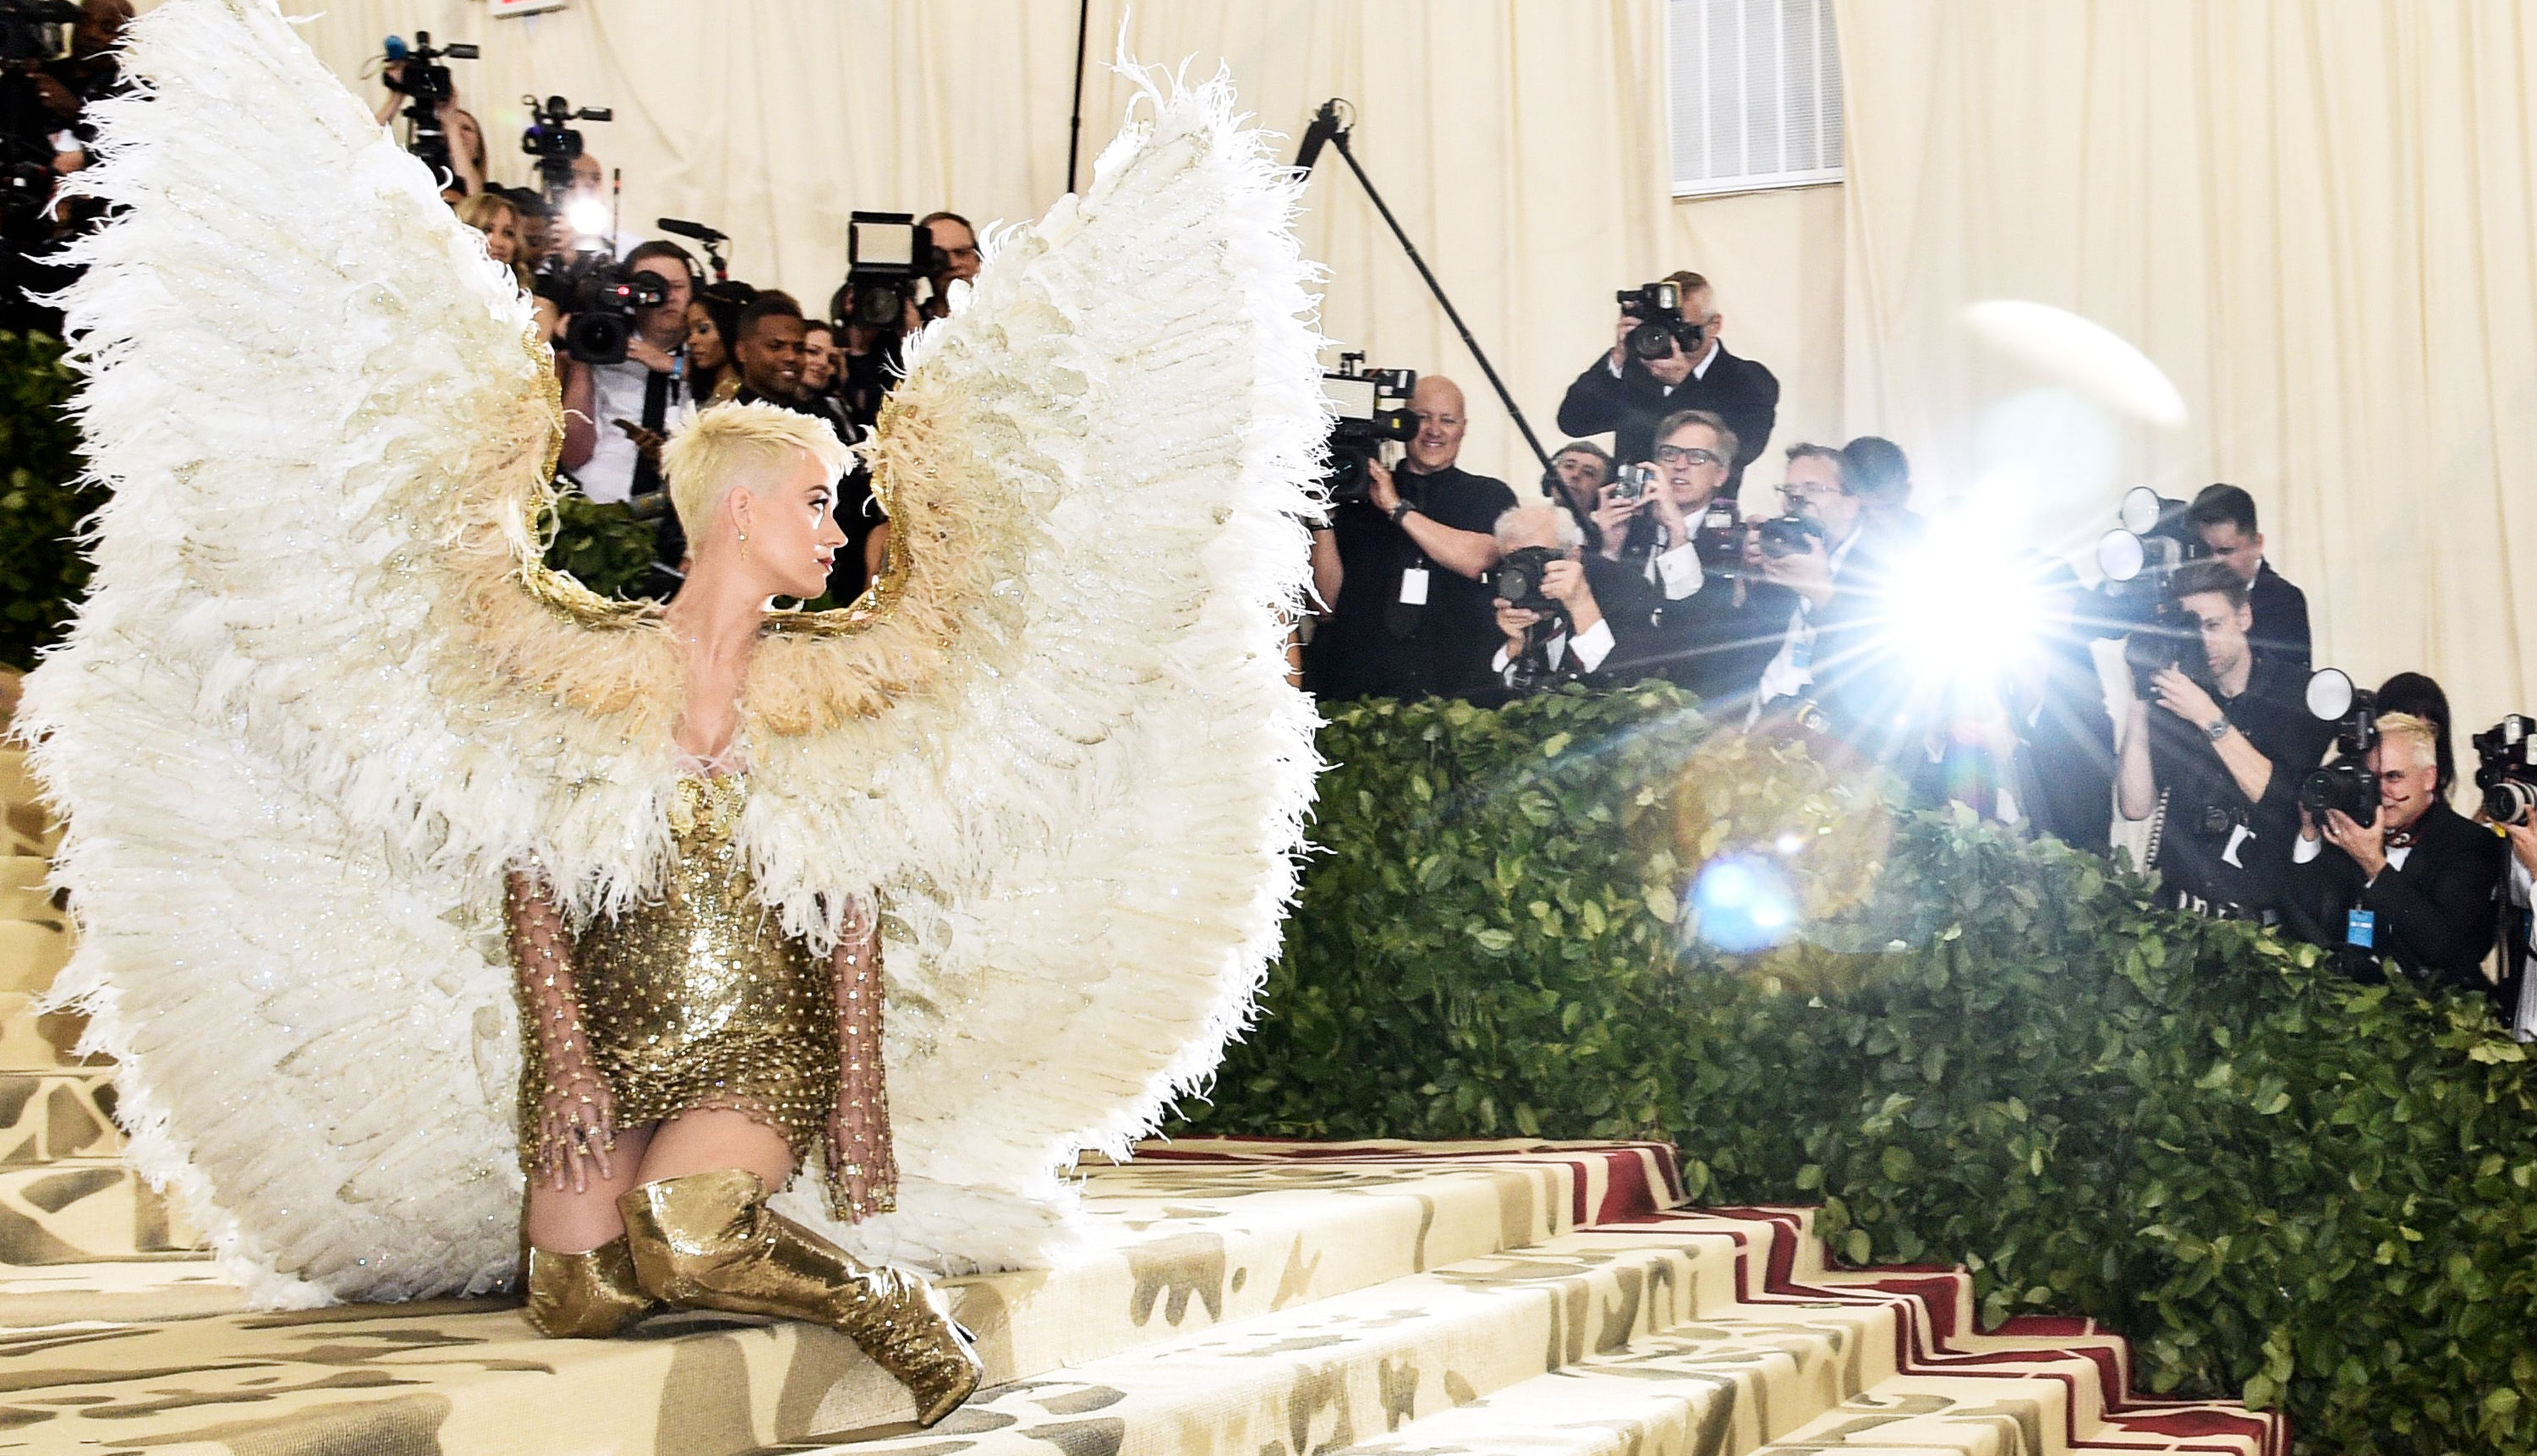 Met Gala 2018: The Most Spectacular Looks At This Year'S Religious-Themed  Fashion Party